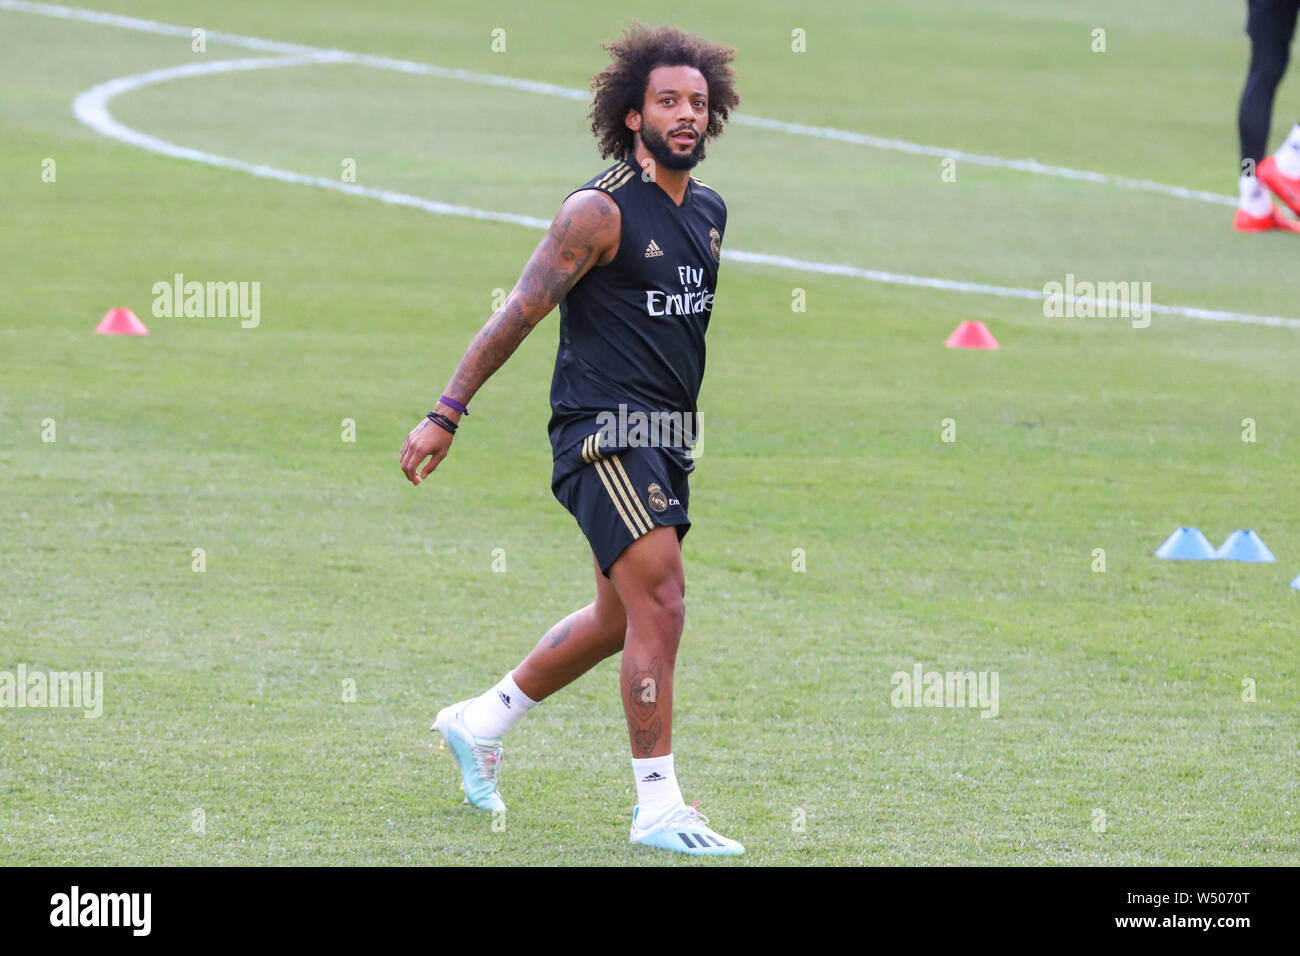 East Rutherford, United States. 25th July, 2019. Marcelo of Real Madrid during training at MetLife Stadium in the city of East Rutherford on Thursday, 25. The team faces Atletico Madrid tomorrow for the International Champions Cup. Credit: Brazil Photo Press/Alamy Live News Stock Photo